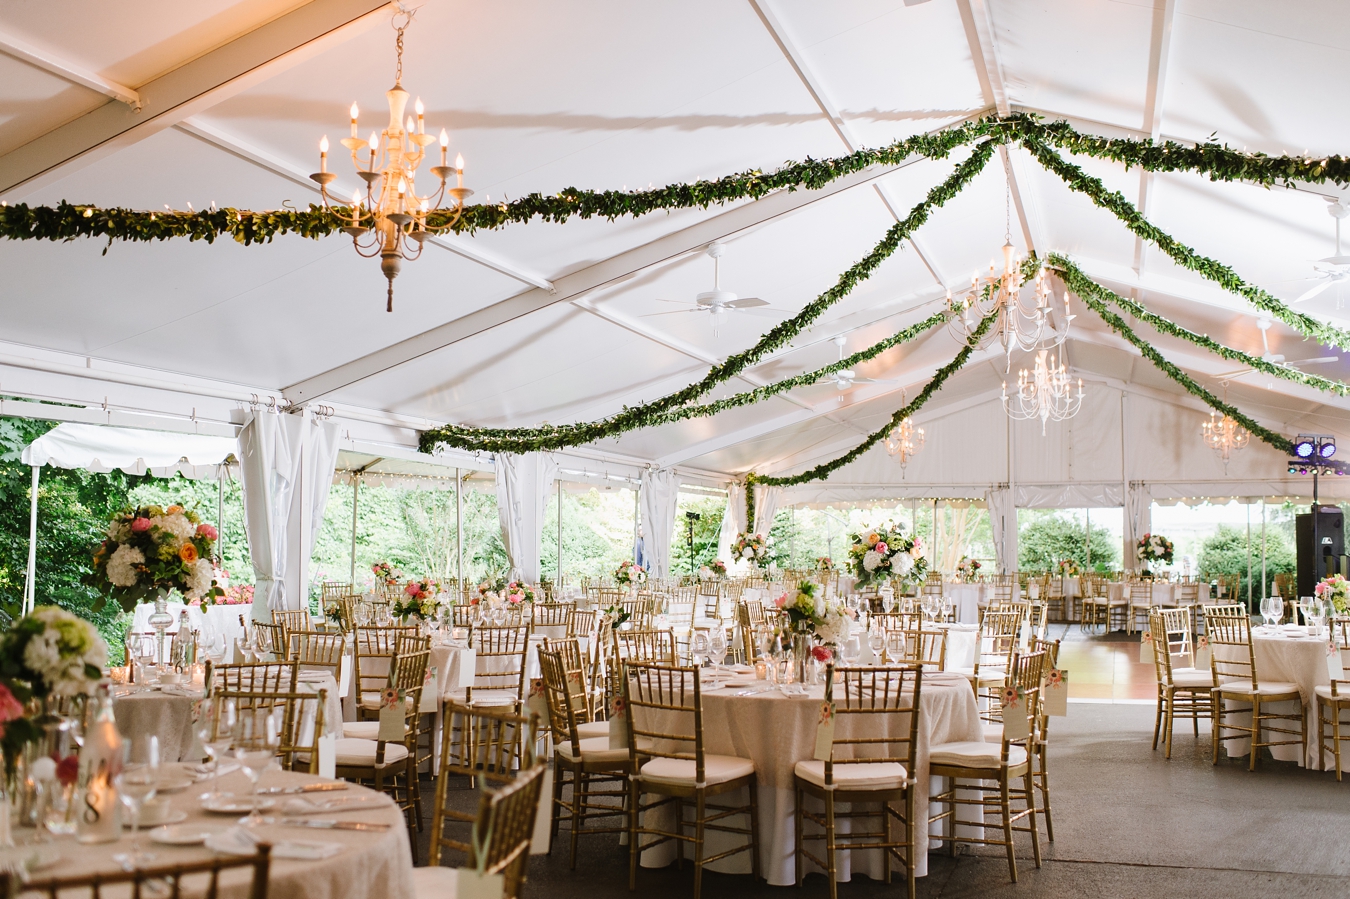 Romantic Garden Tent Reception Design with Peonies and Garland by Ashlee Virginia Events | Natalie Franke Photography